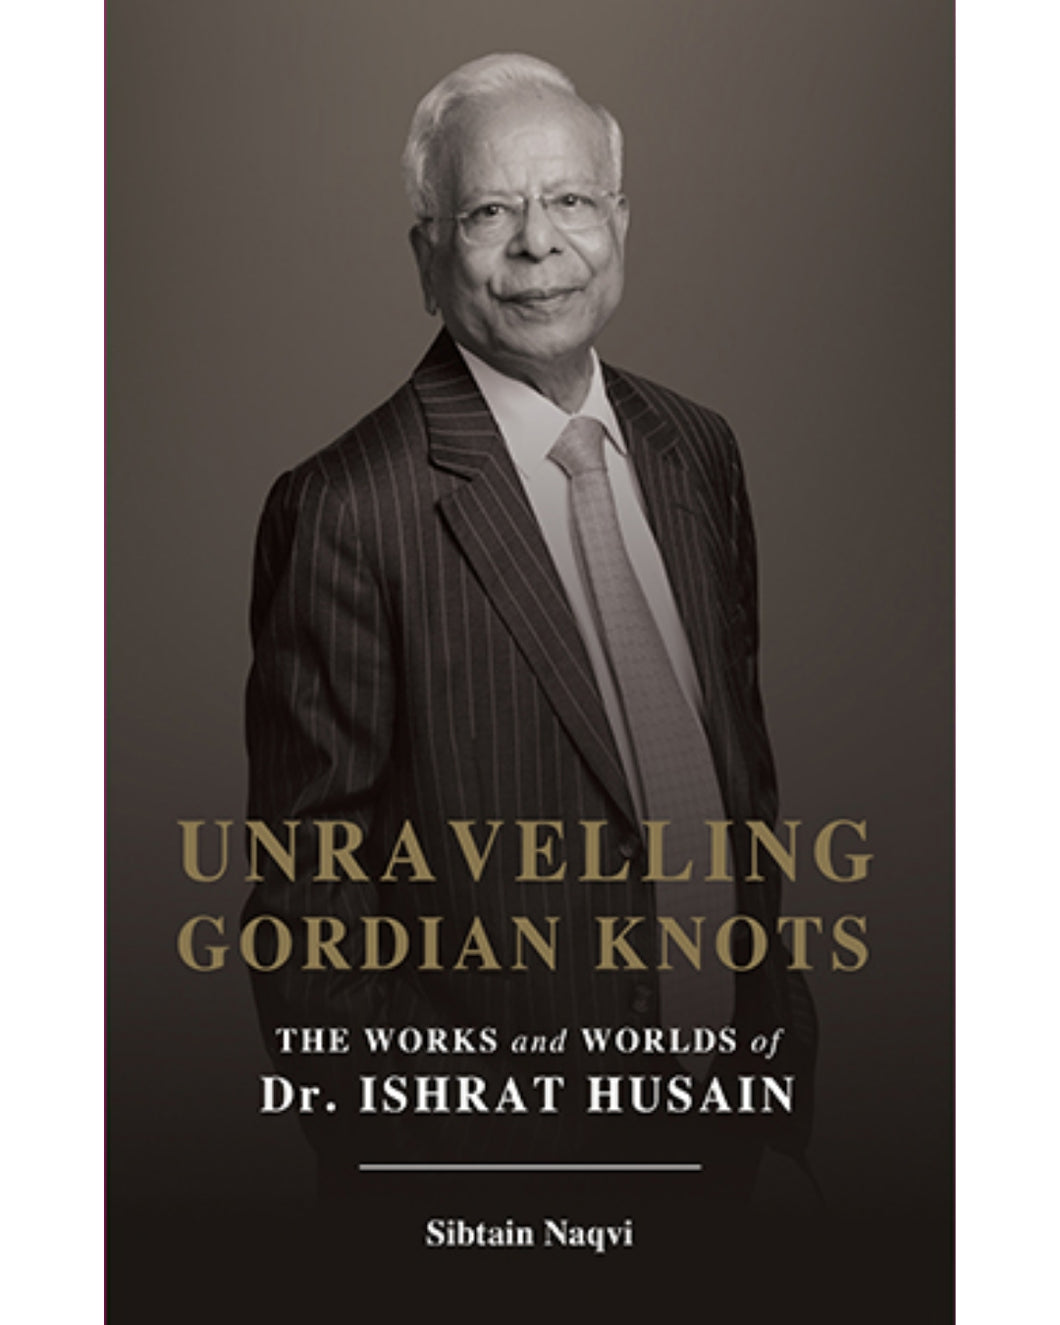 Unravelling Gordian Knots - The Works and Worlds of Dr. Ishrat Hussain